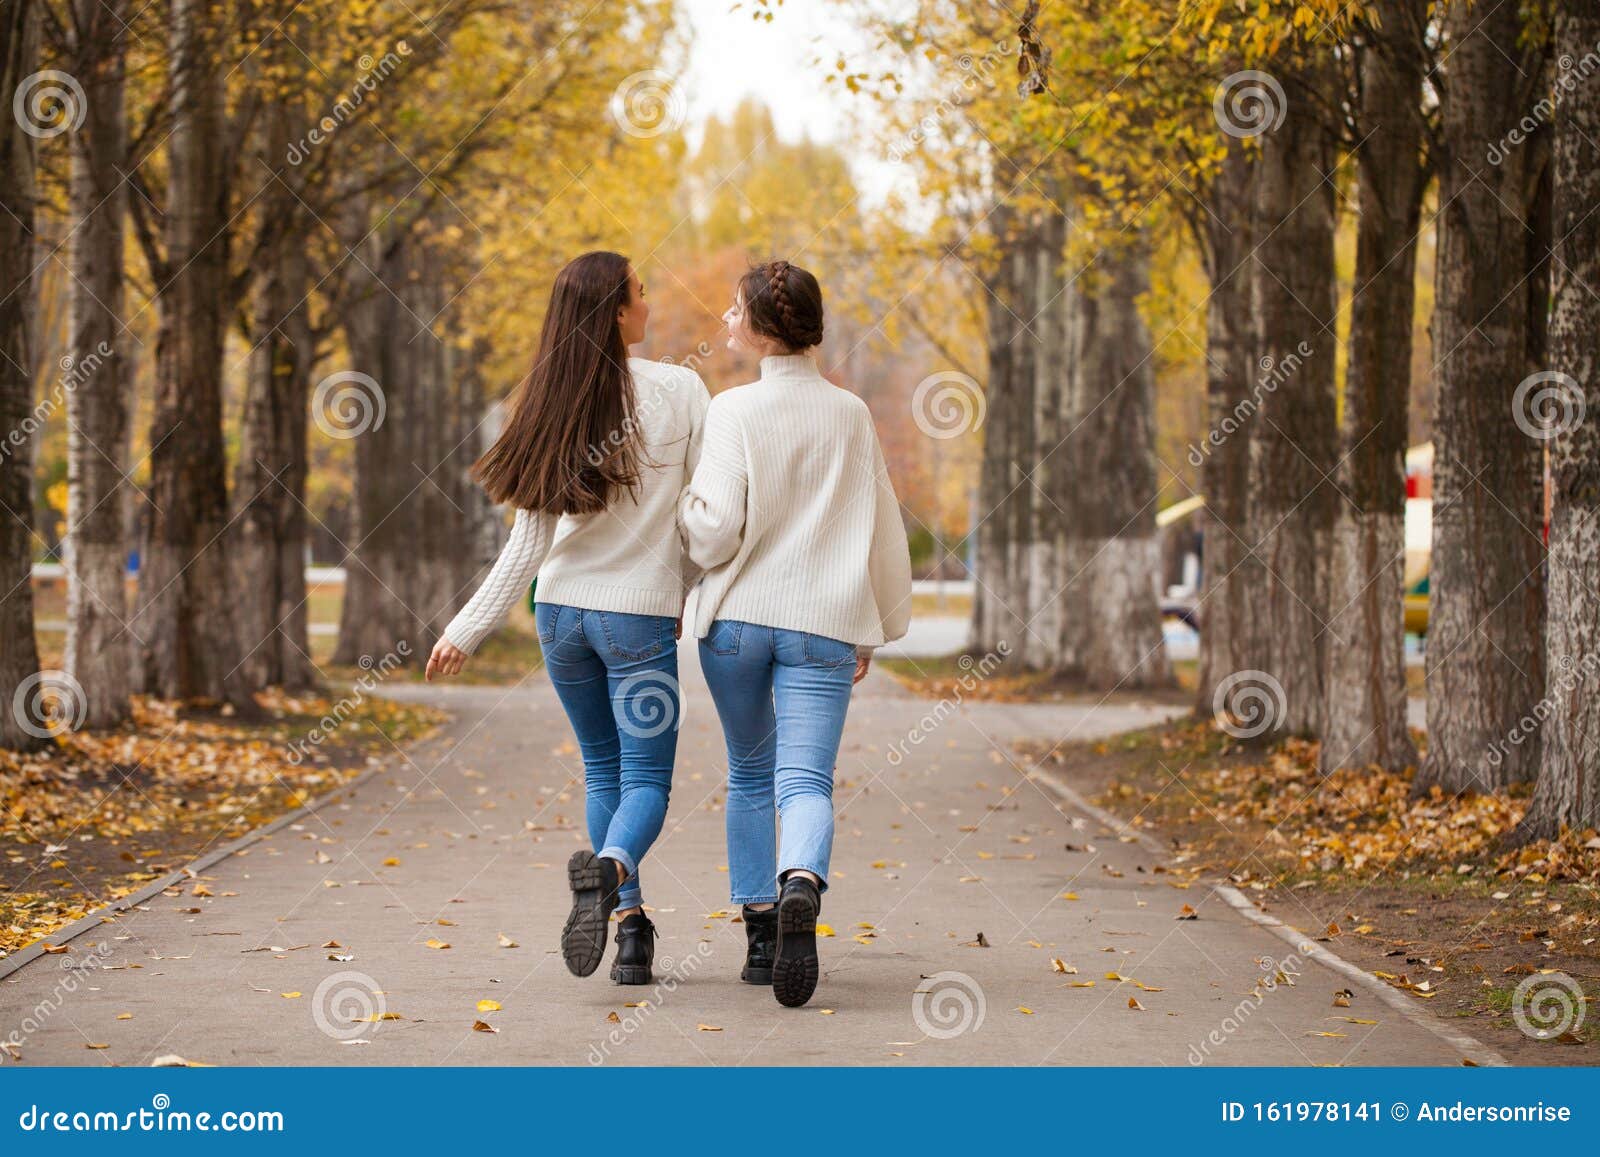 Two Girlfriends in a White Woolen Sweater and Blue Jeans Stock Image ...